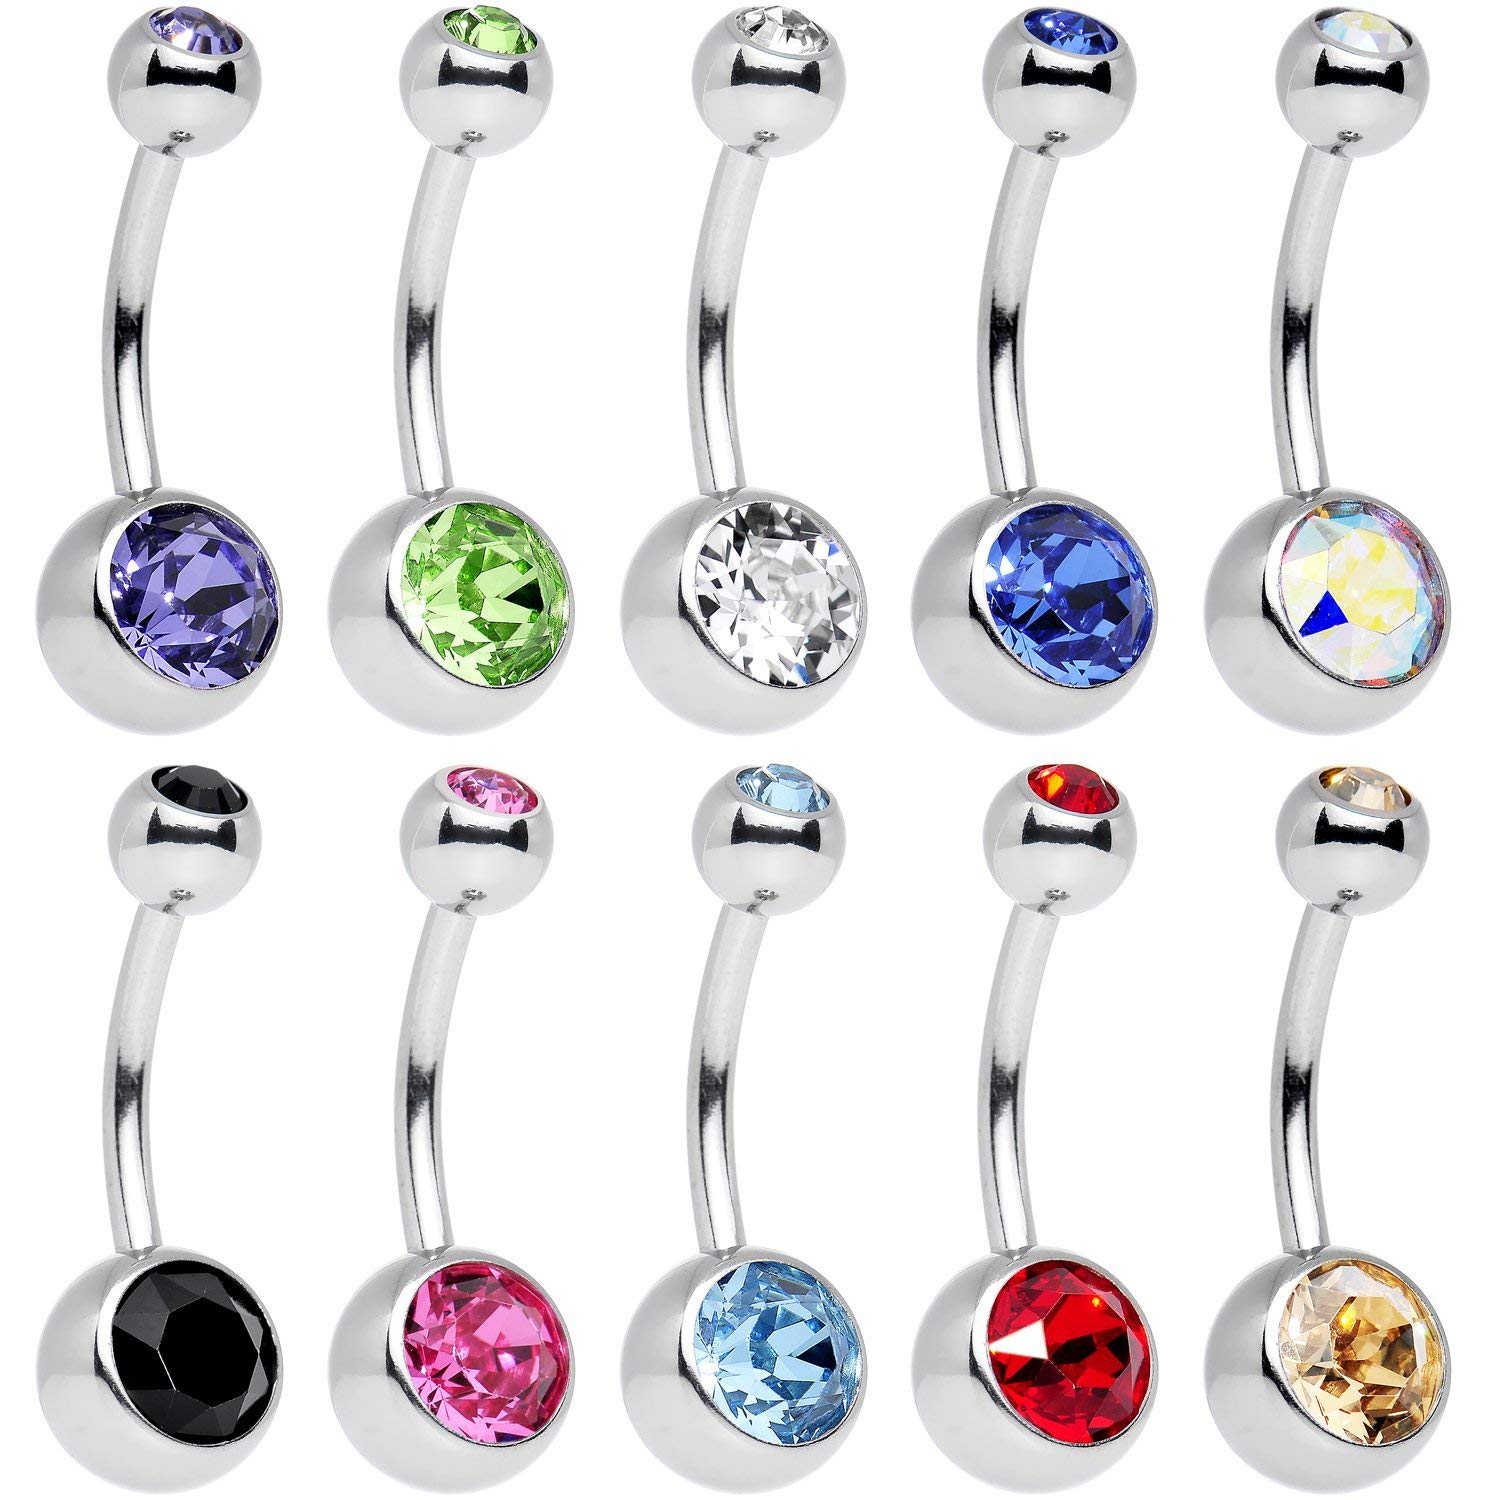 15 PCS Assorted Colors Belly Button Ring Surgical steel Hypoallergenic Lead and Nickel Free,14 Gauge navel piercing body jewelry